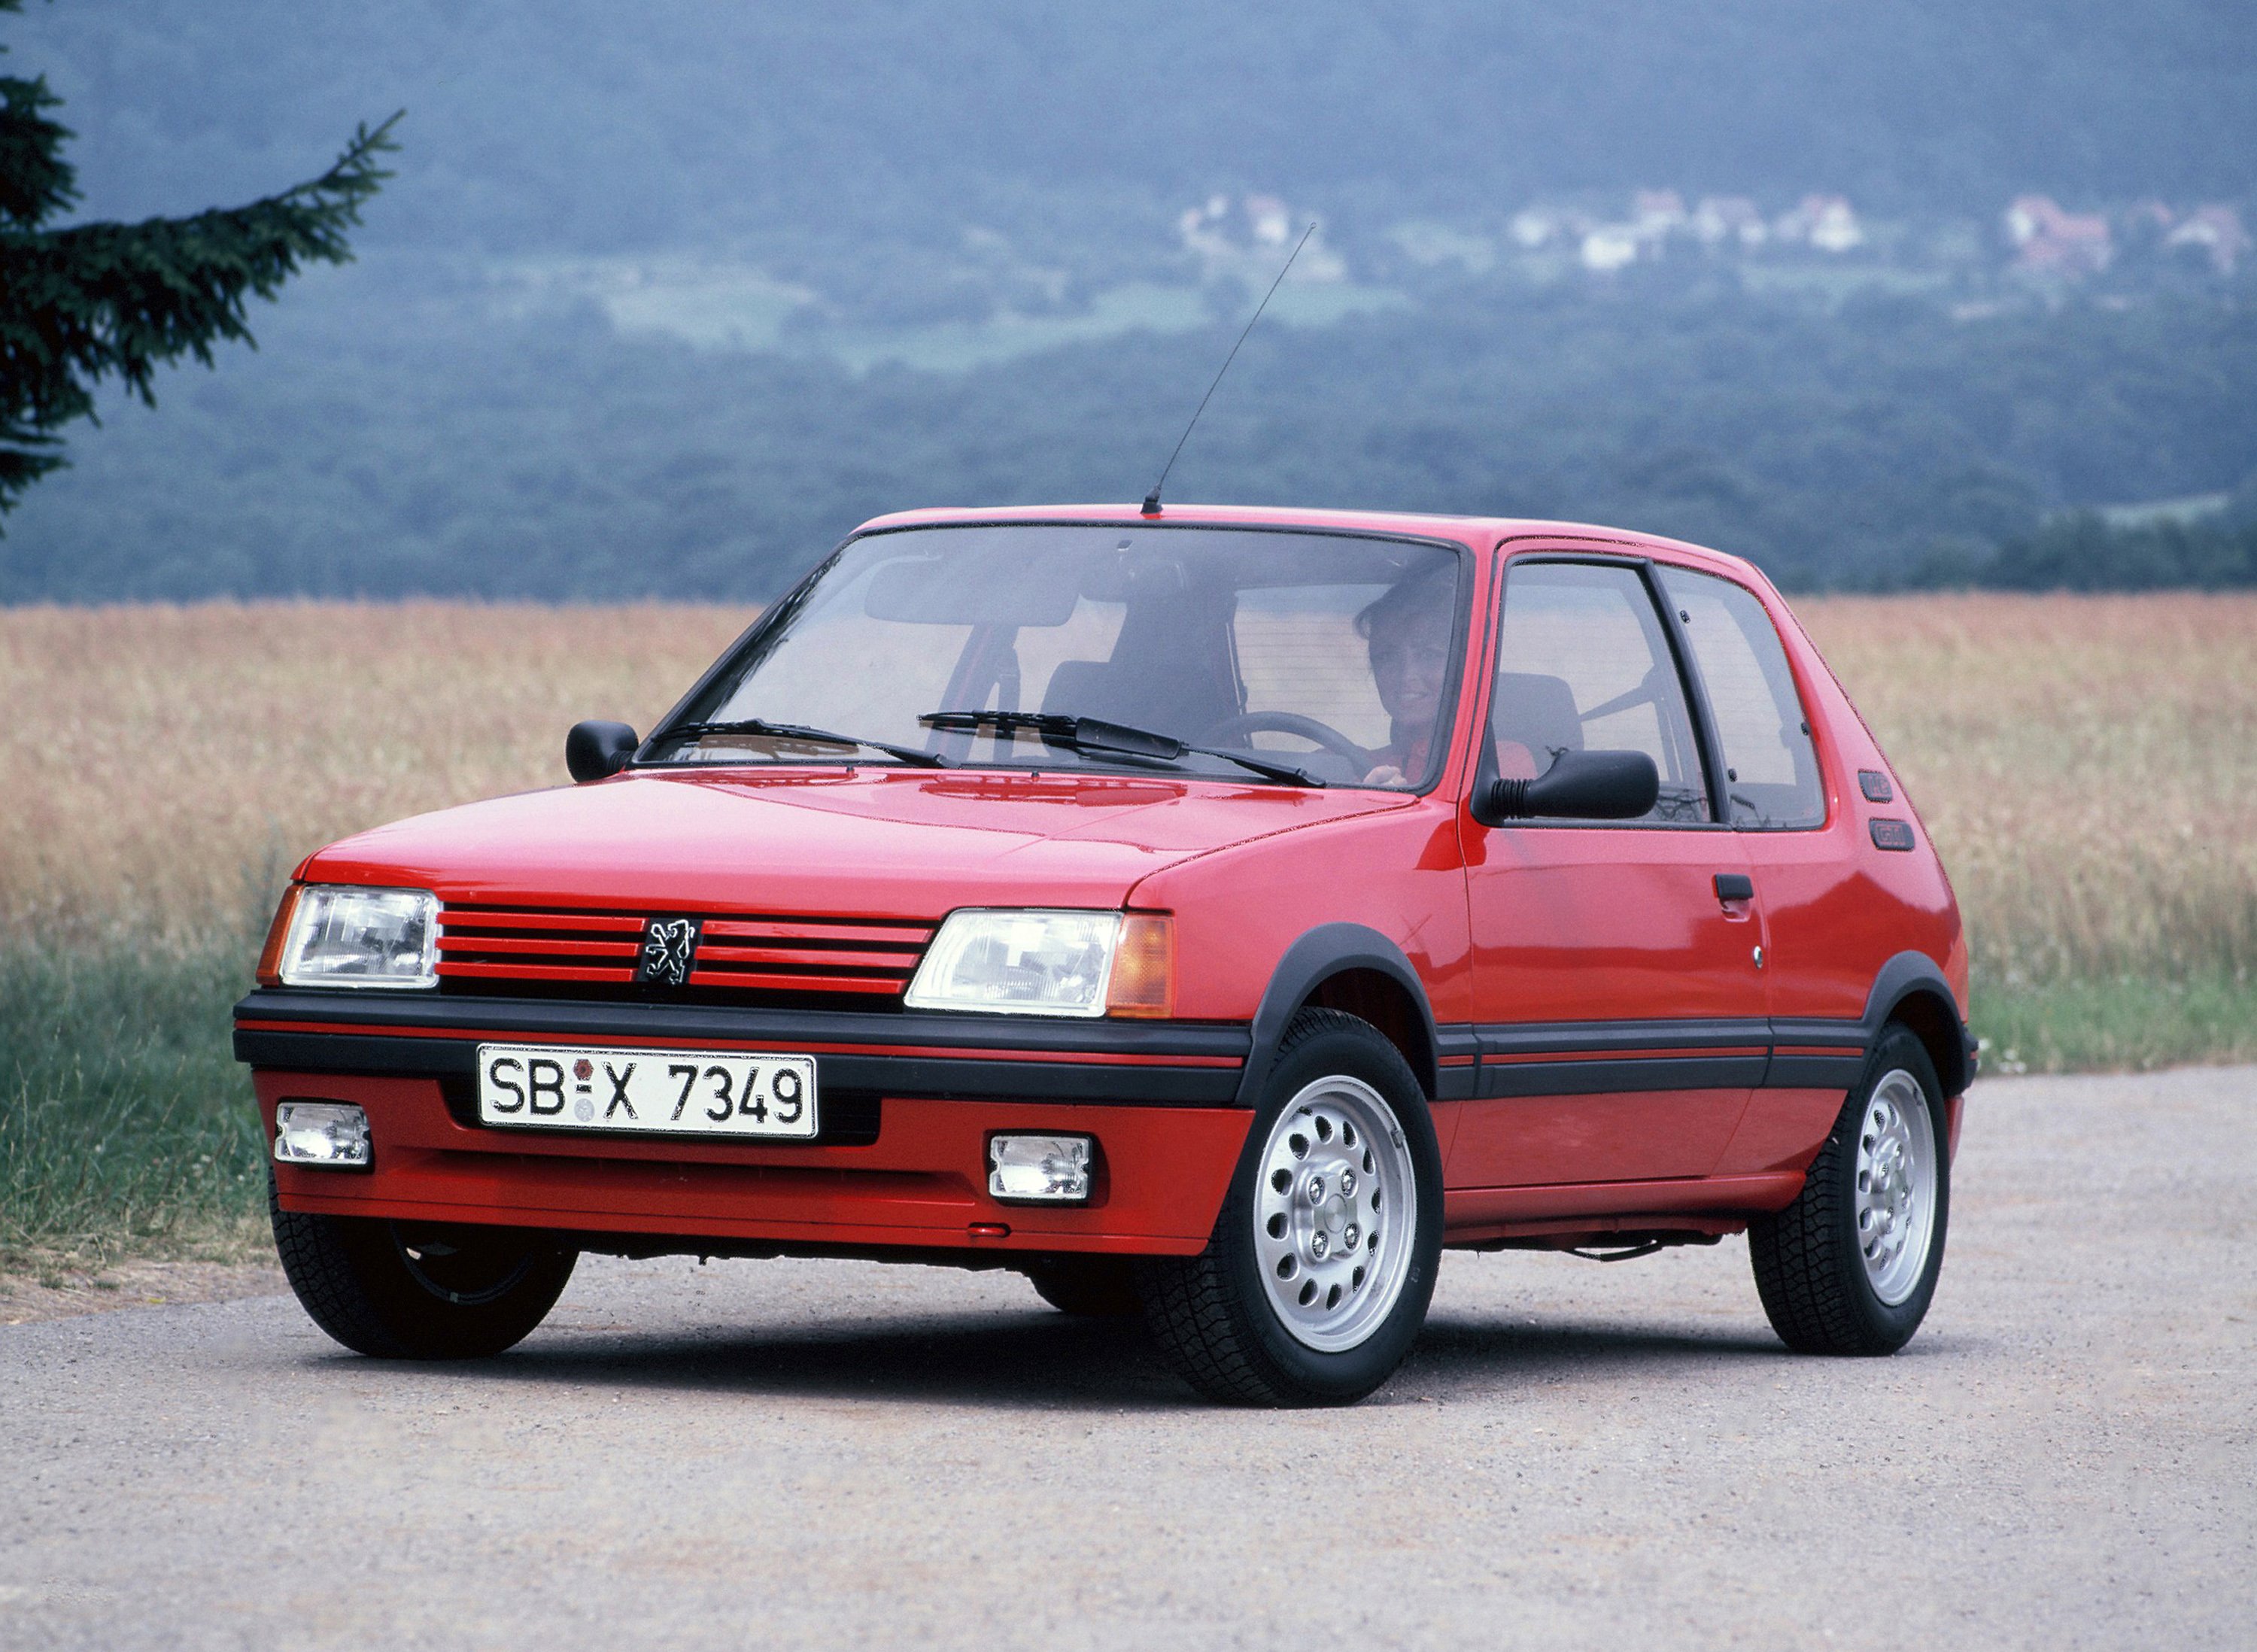 peugeot, 205, 1600, Gti, Cars, French Wallpaper